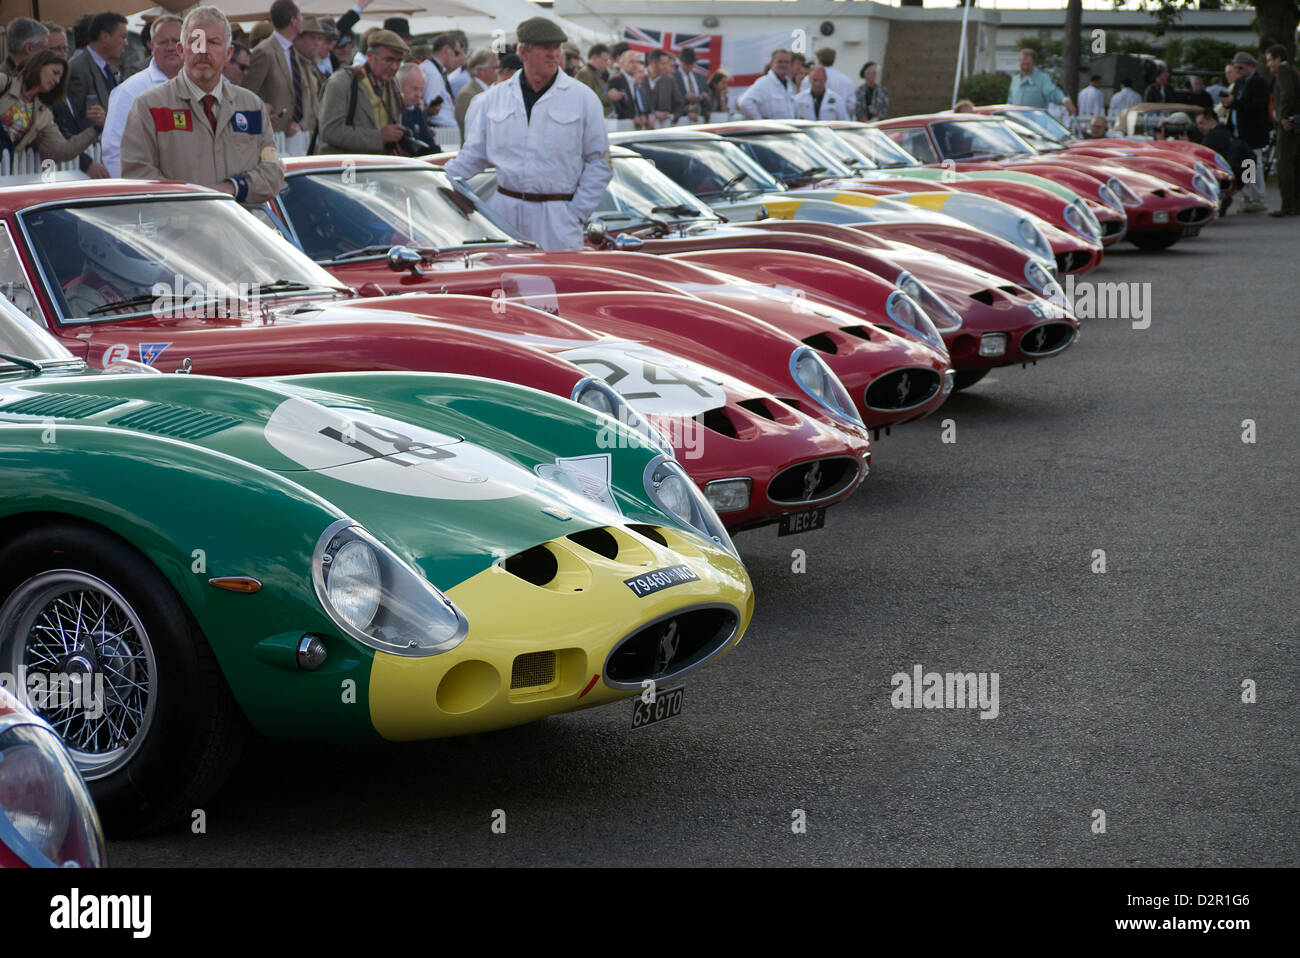 1960's Ferrari 250 GTO racing cars in the paddock before GTO race at Stock Photo: 53366550 - Alamy